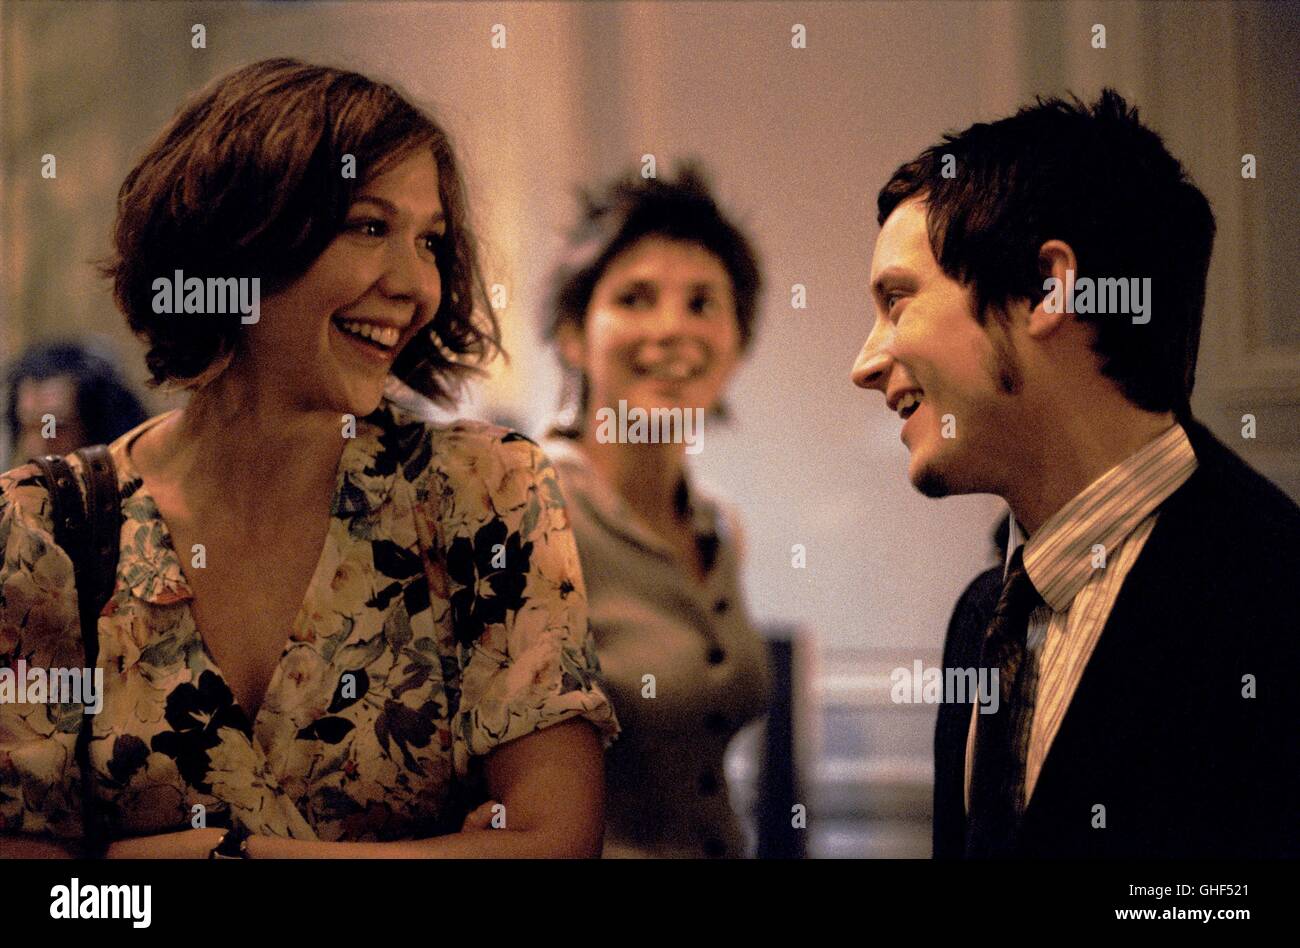 PARIS JE T'AIME Paris je t'aime 2006 Paris je t'aime/ Storys of Love from the City of Love. MAGGIE GYLLENHAAL with ELIJAH WOOD / Segment Quartier des Enfants Rouges directed by Olivier Assayas aka. Paris je t'aime Stock Photo